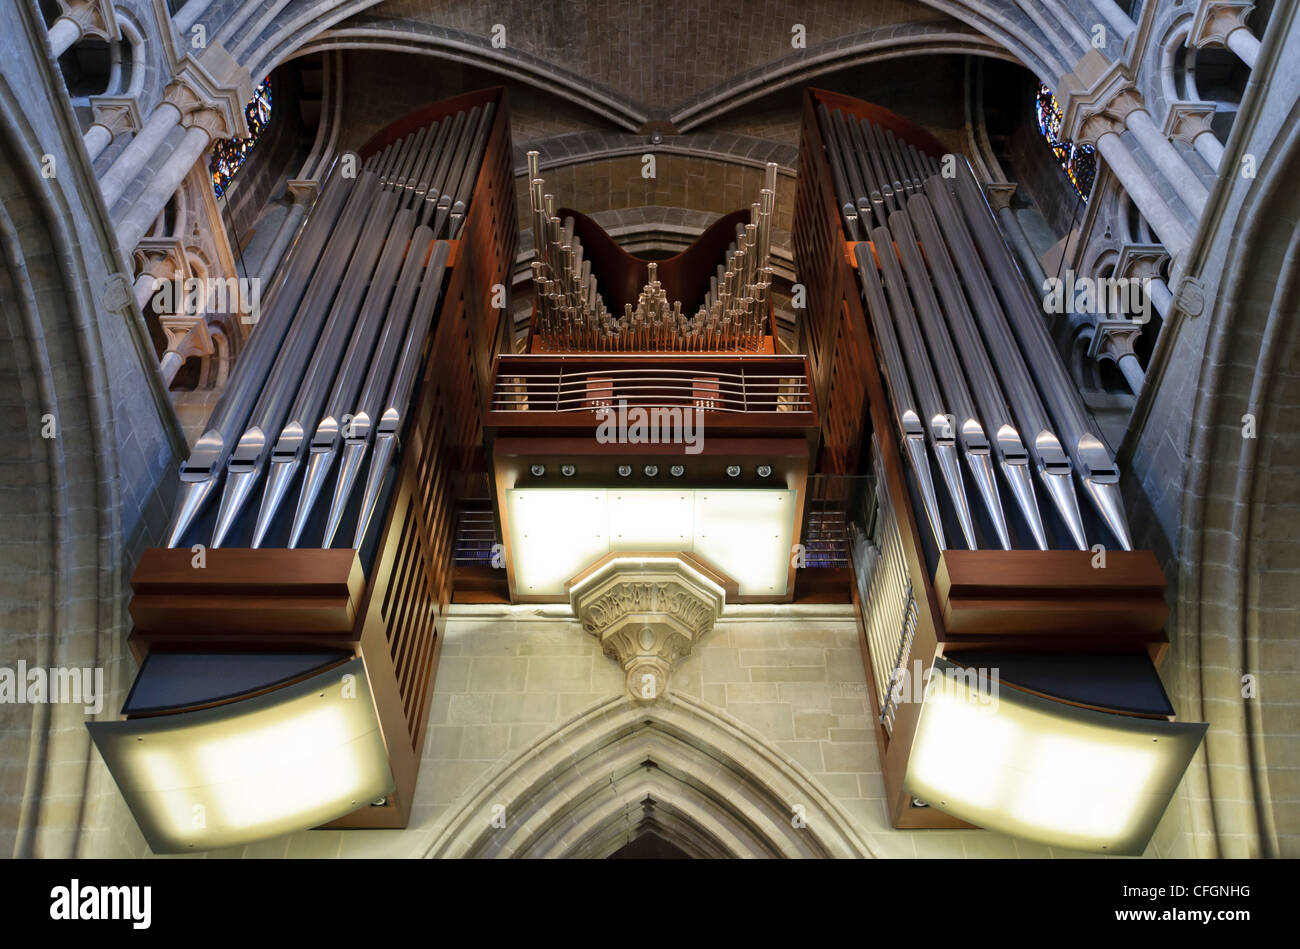 Organ pipes from Lausanne cathedral. Swirzerland. Stock Photo